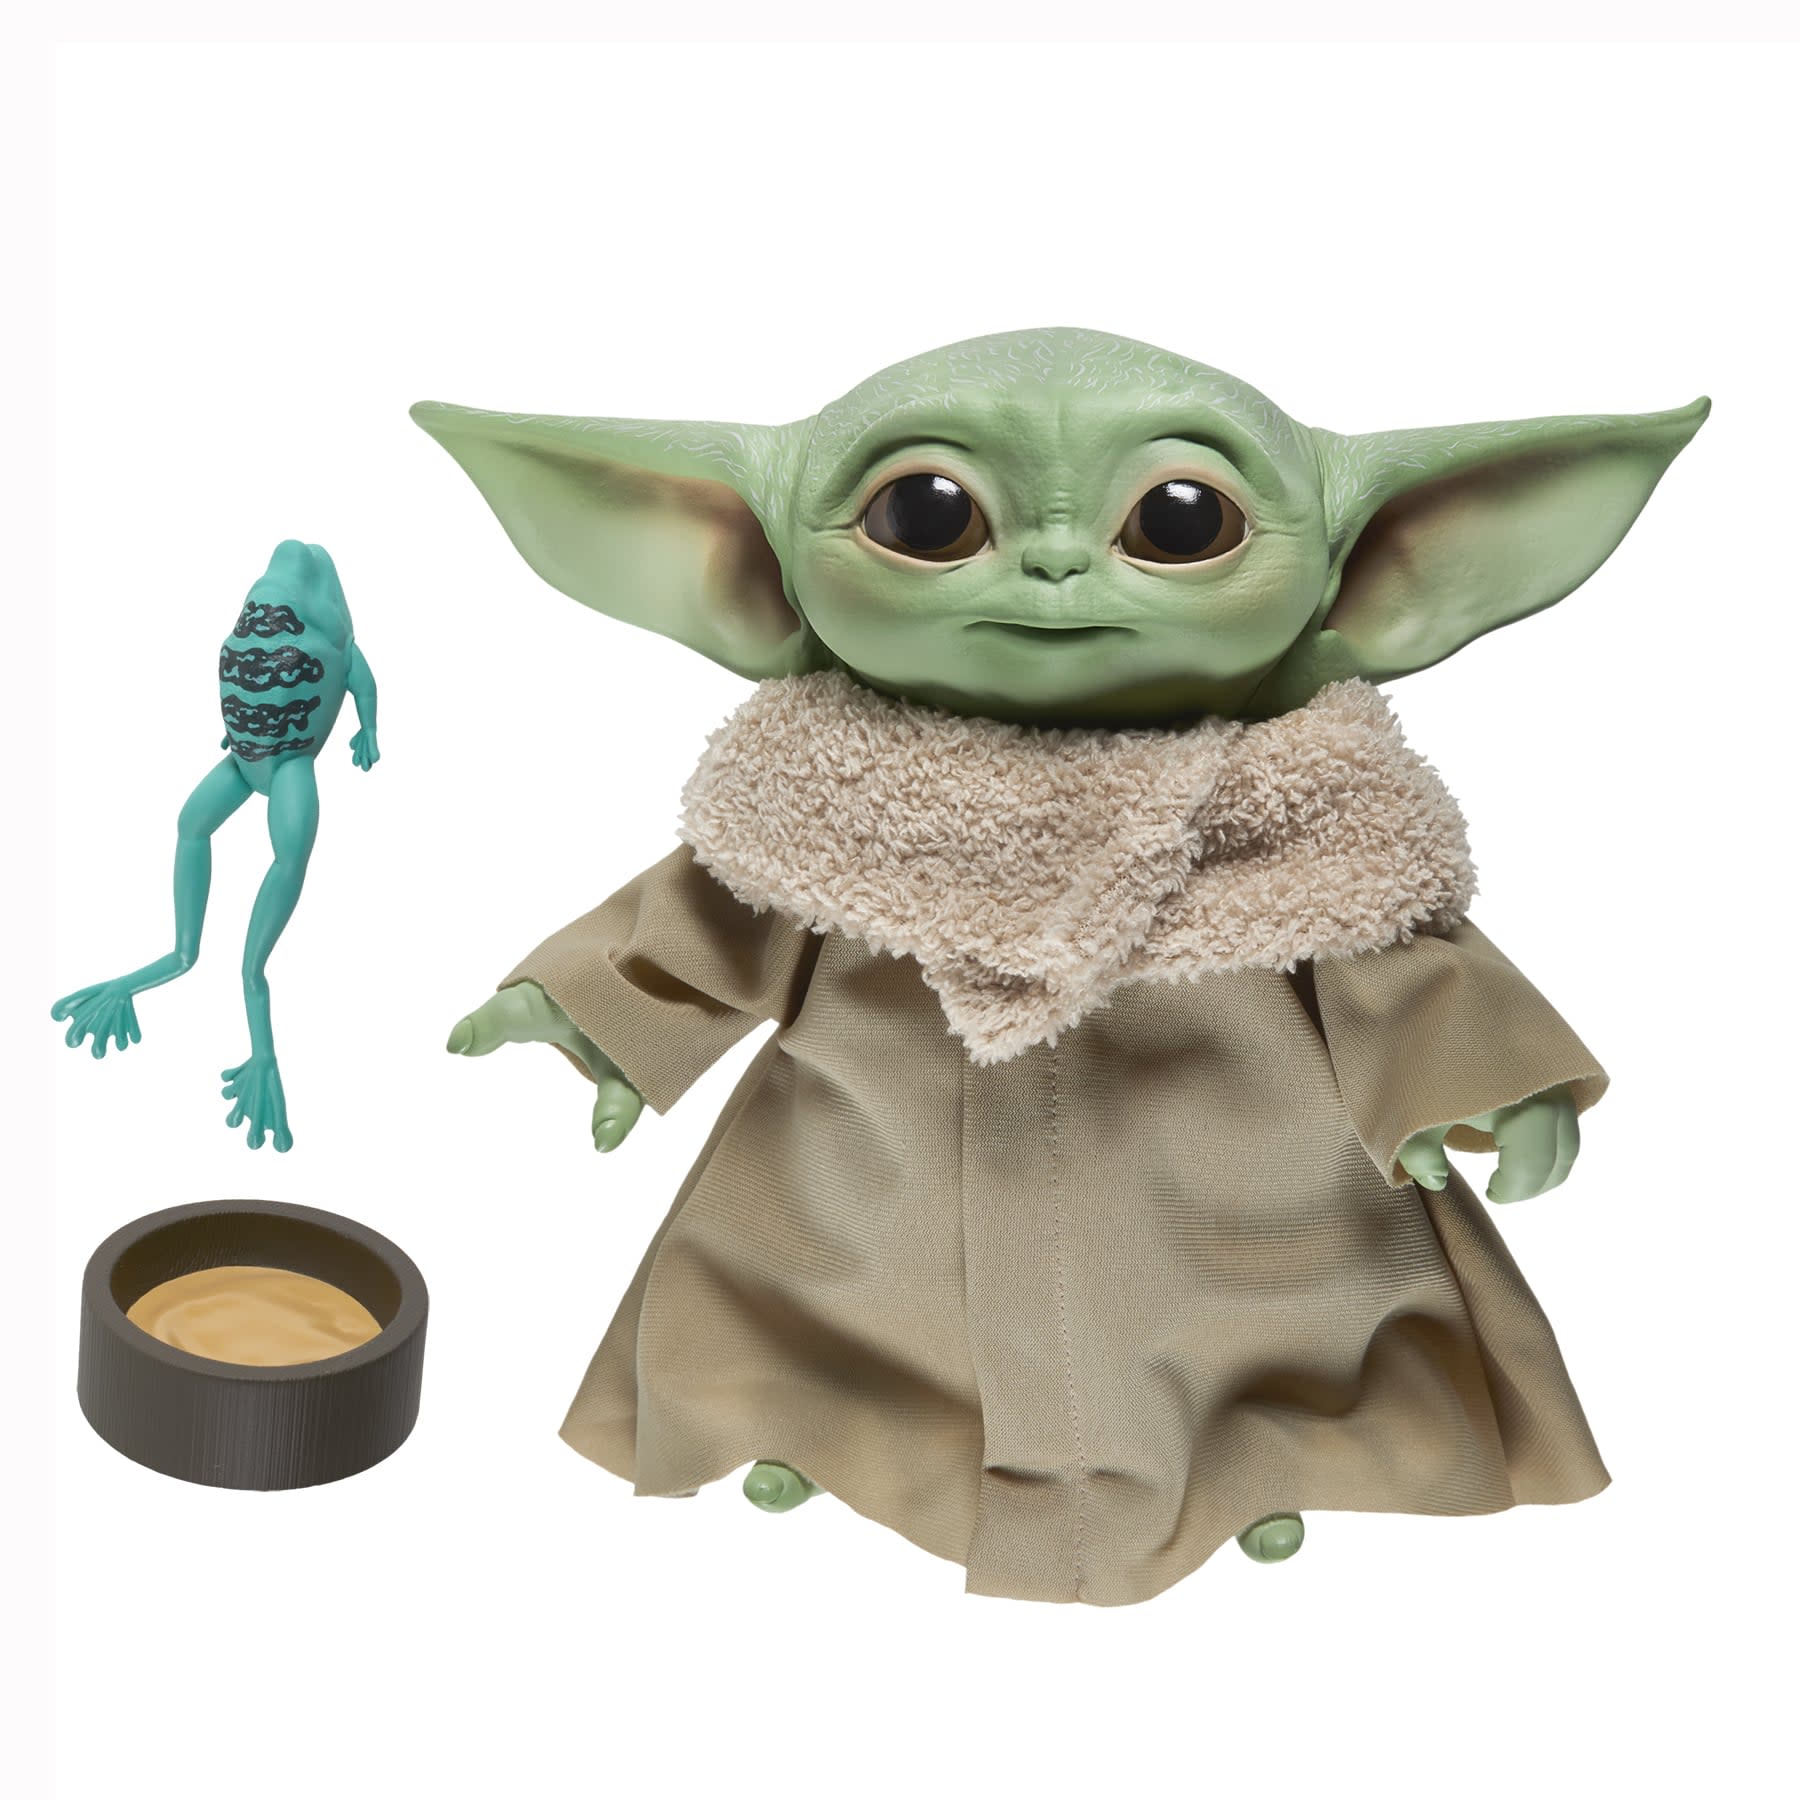 Hasbro Is Releasing A Baby Yoda Talking Plush In May And The Force Is Adorable With This One